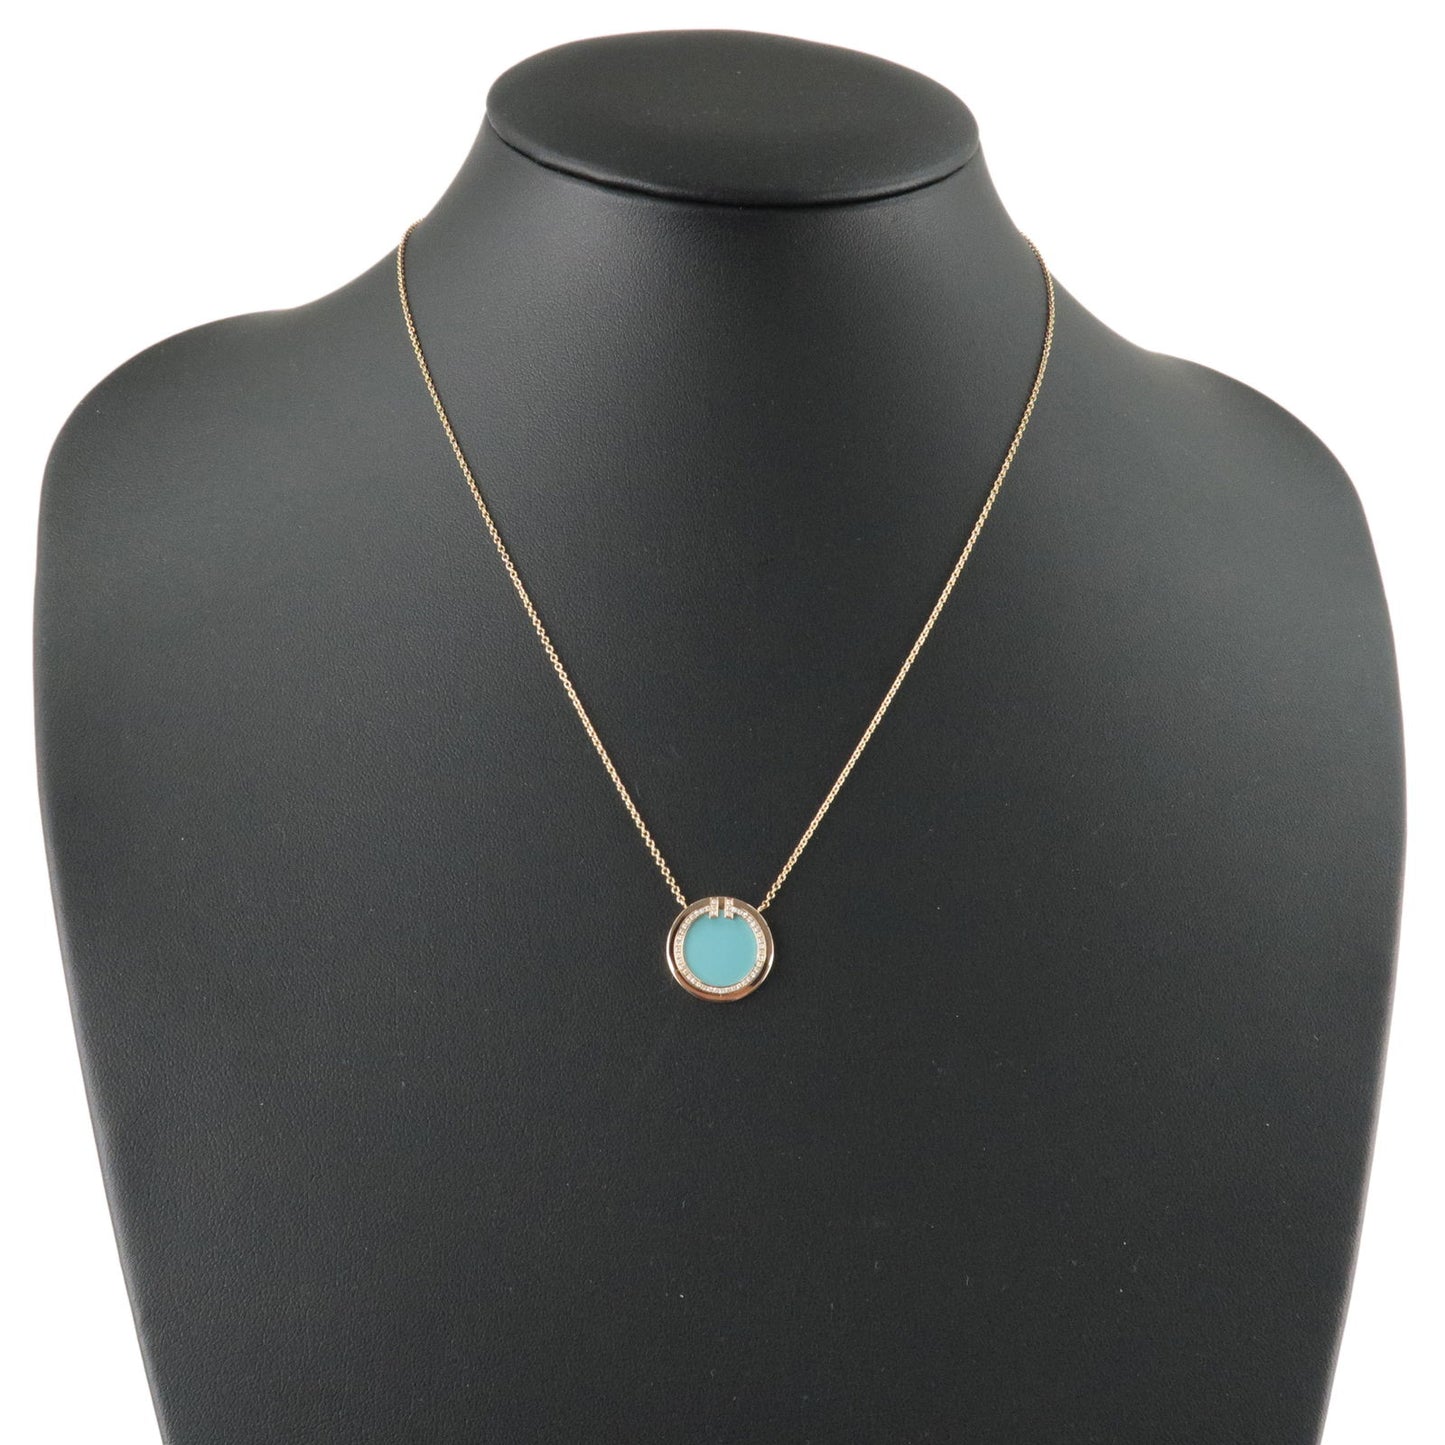 Tiffany&Co. T TWO Circle Diamond Turquoise Necklace K18PG 750PG